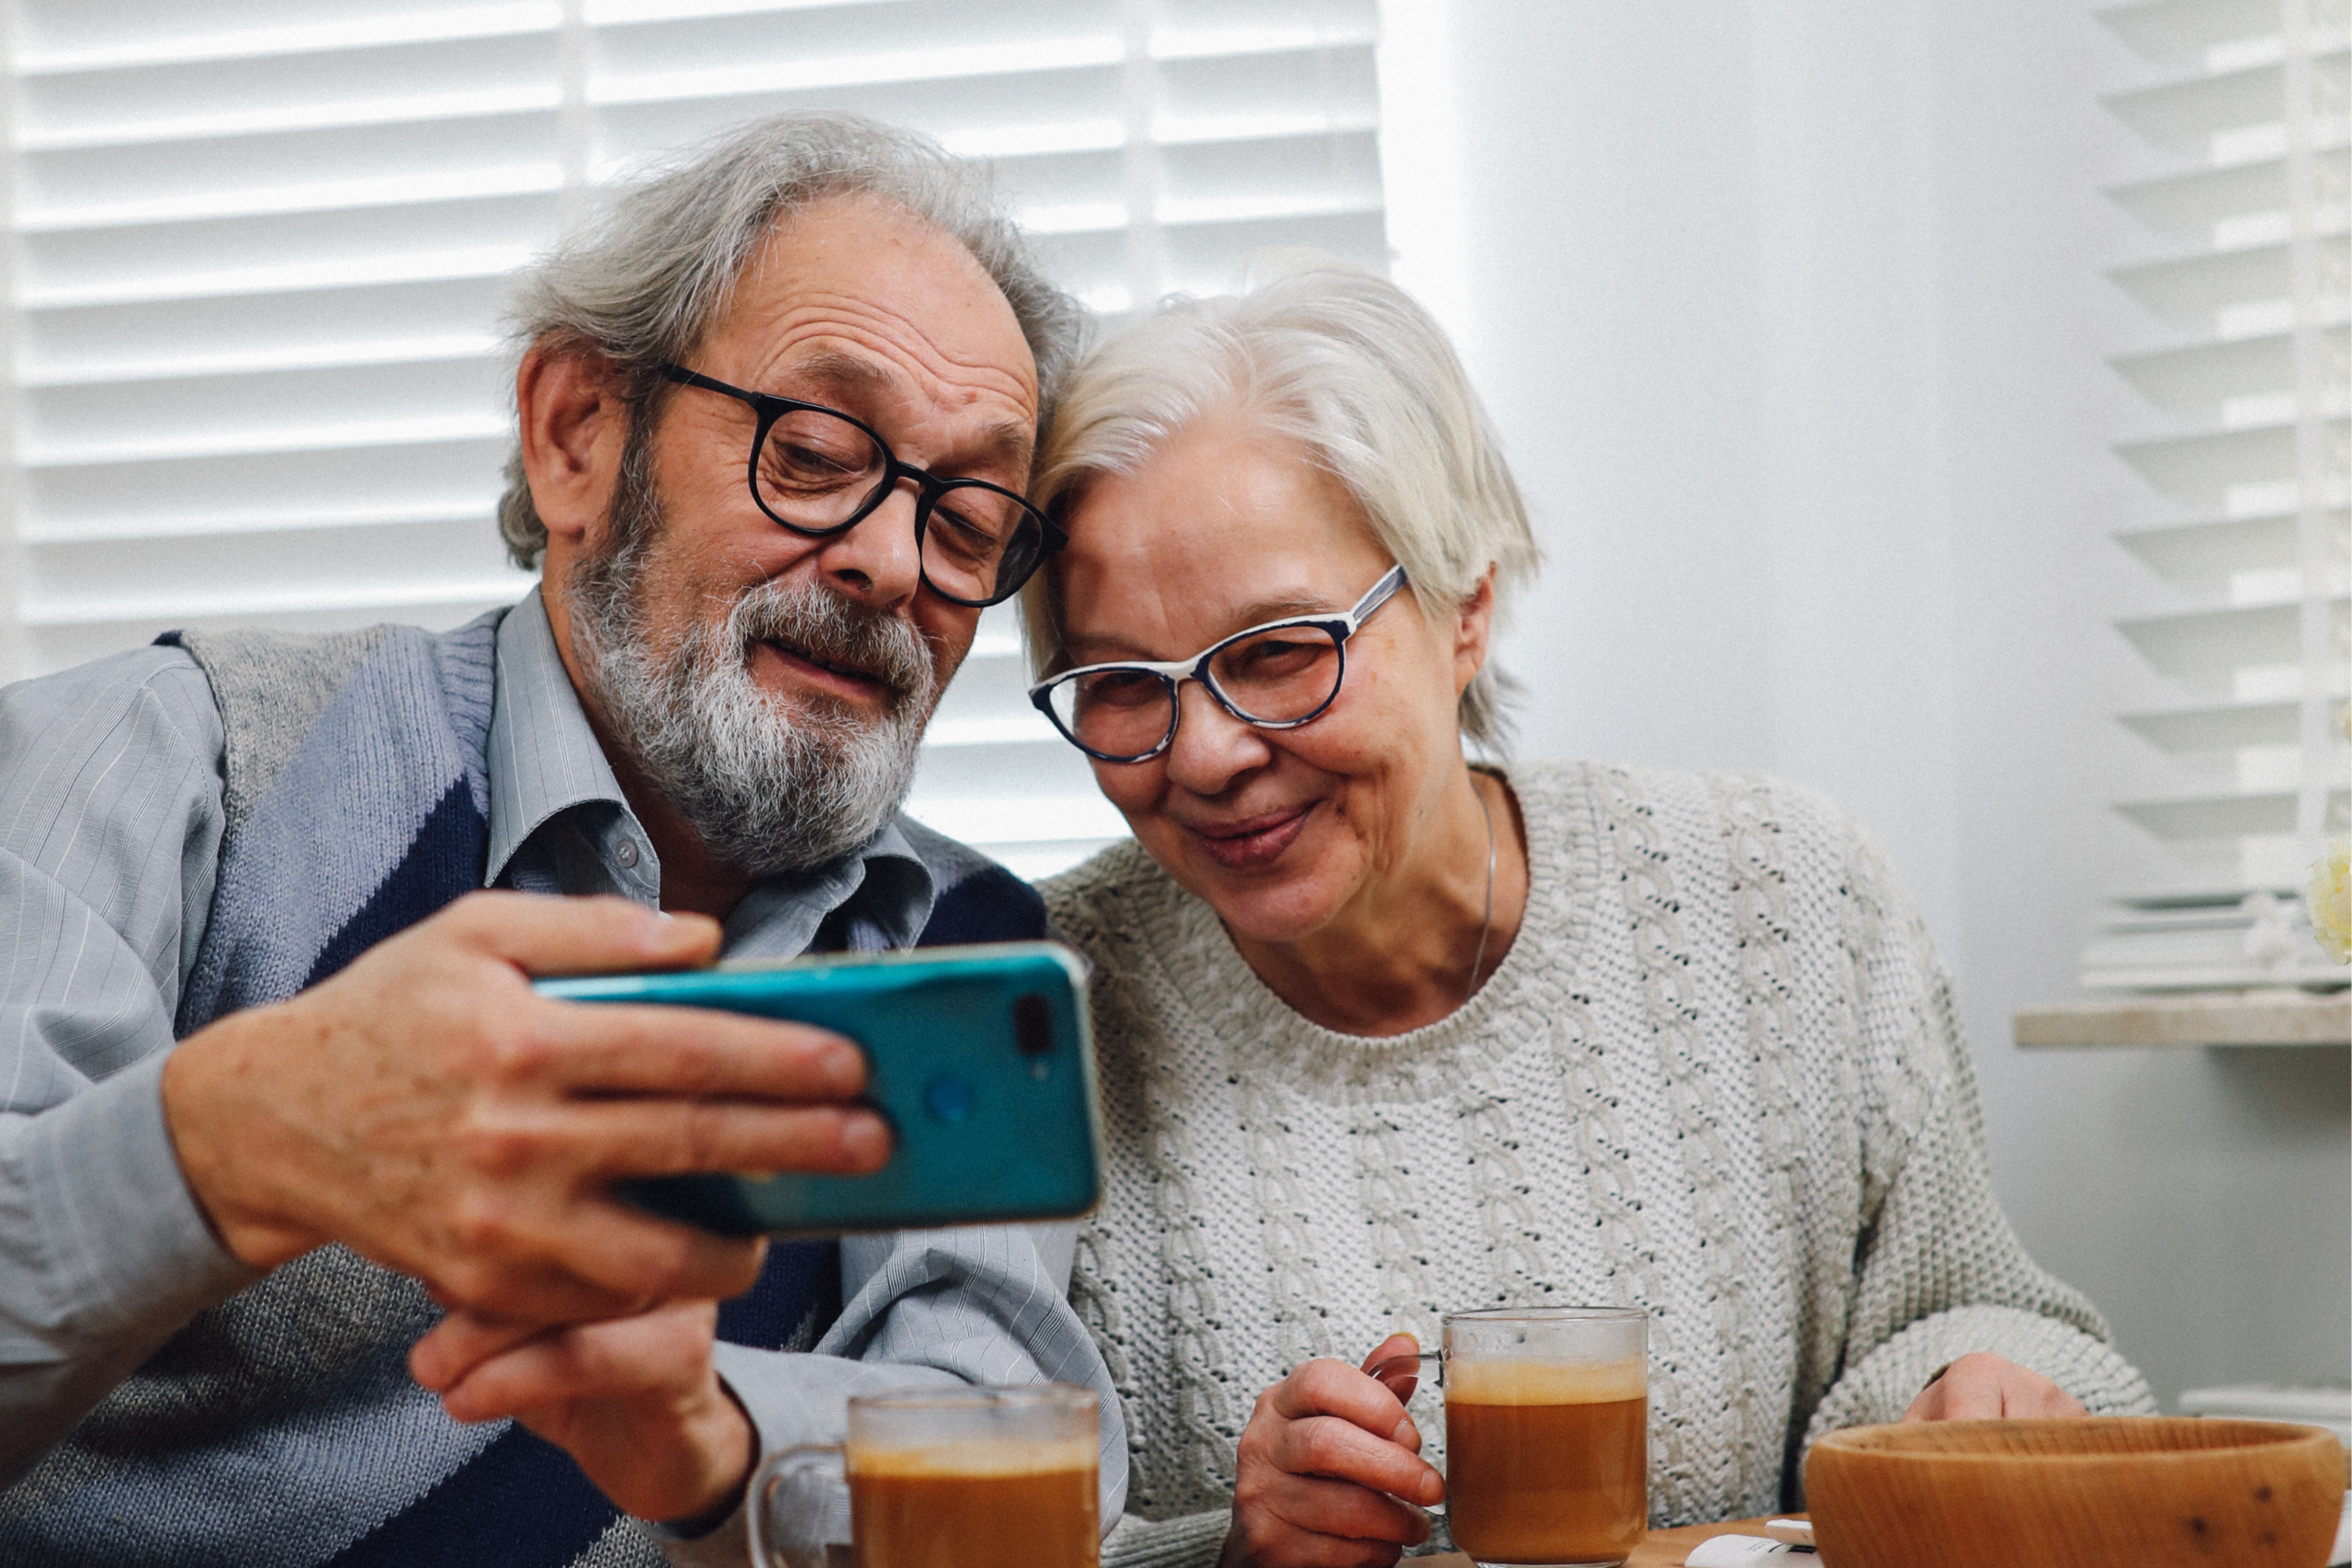 A senior man and woman smile while looking at a mobile device.